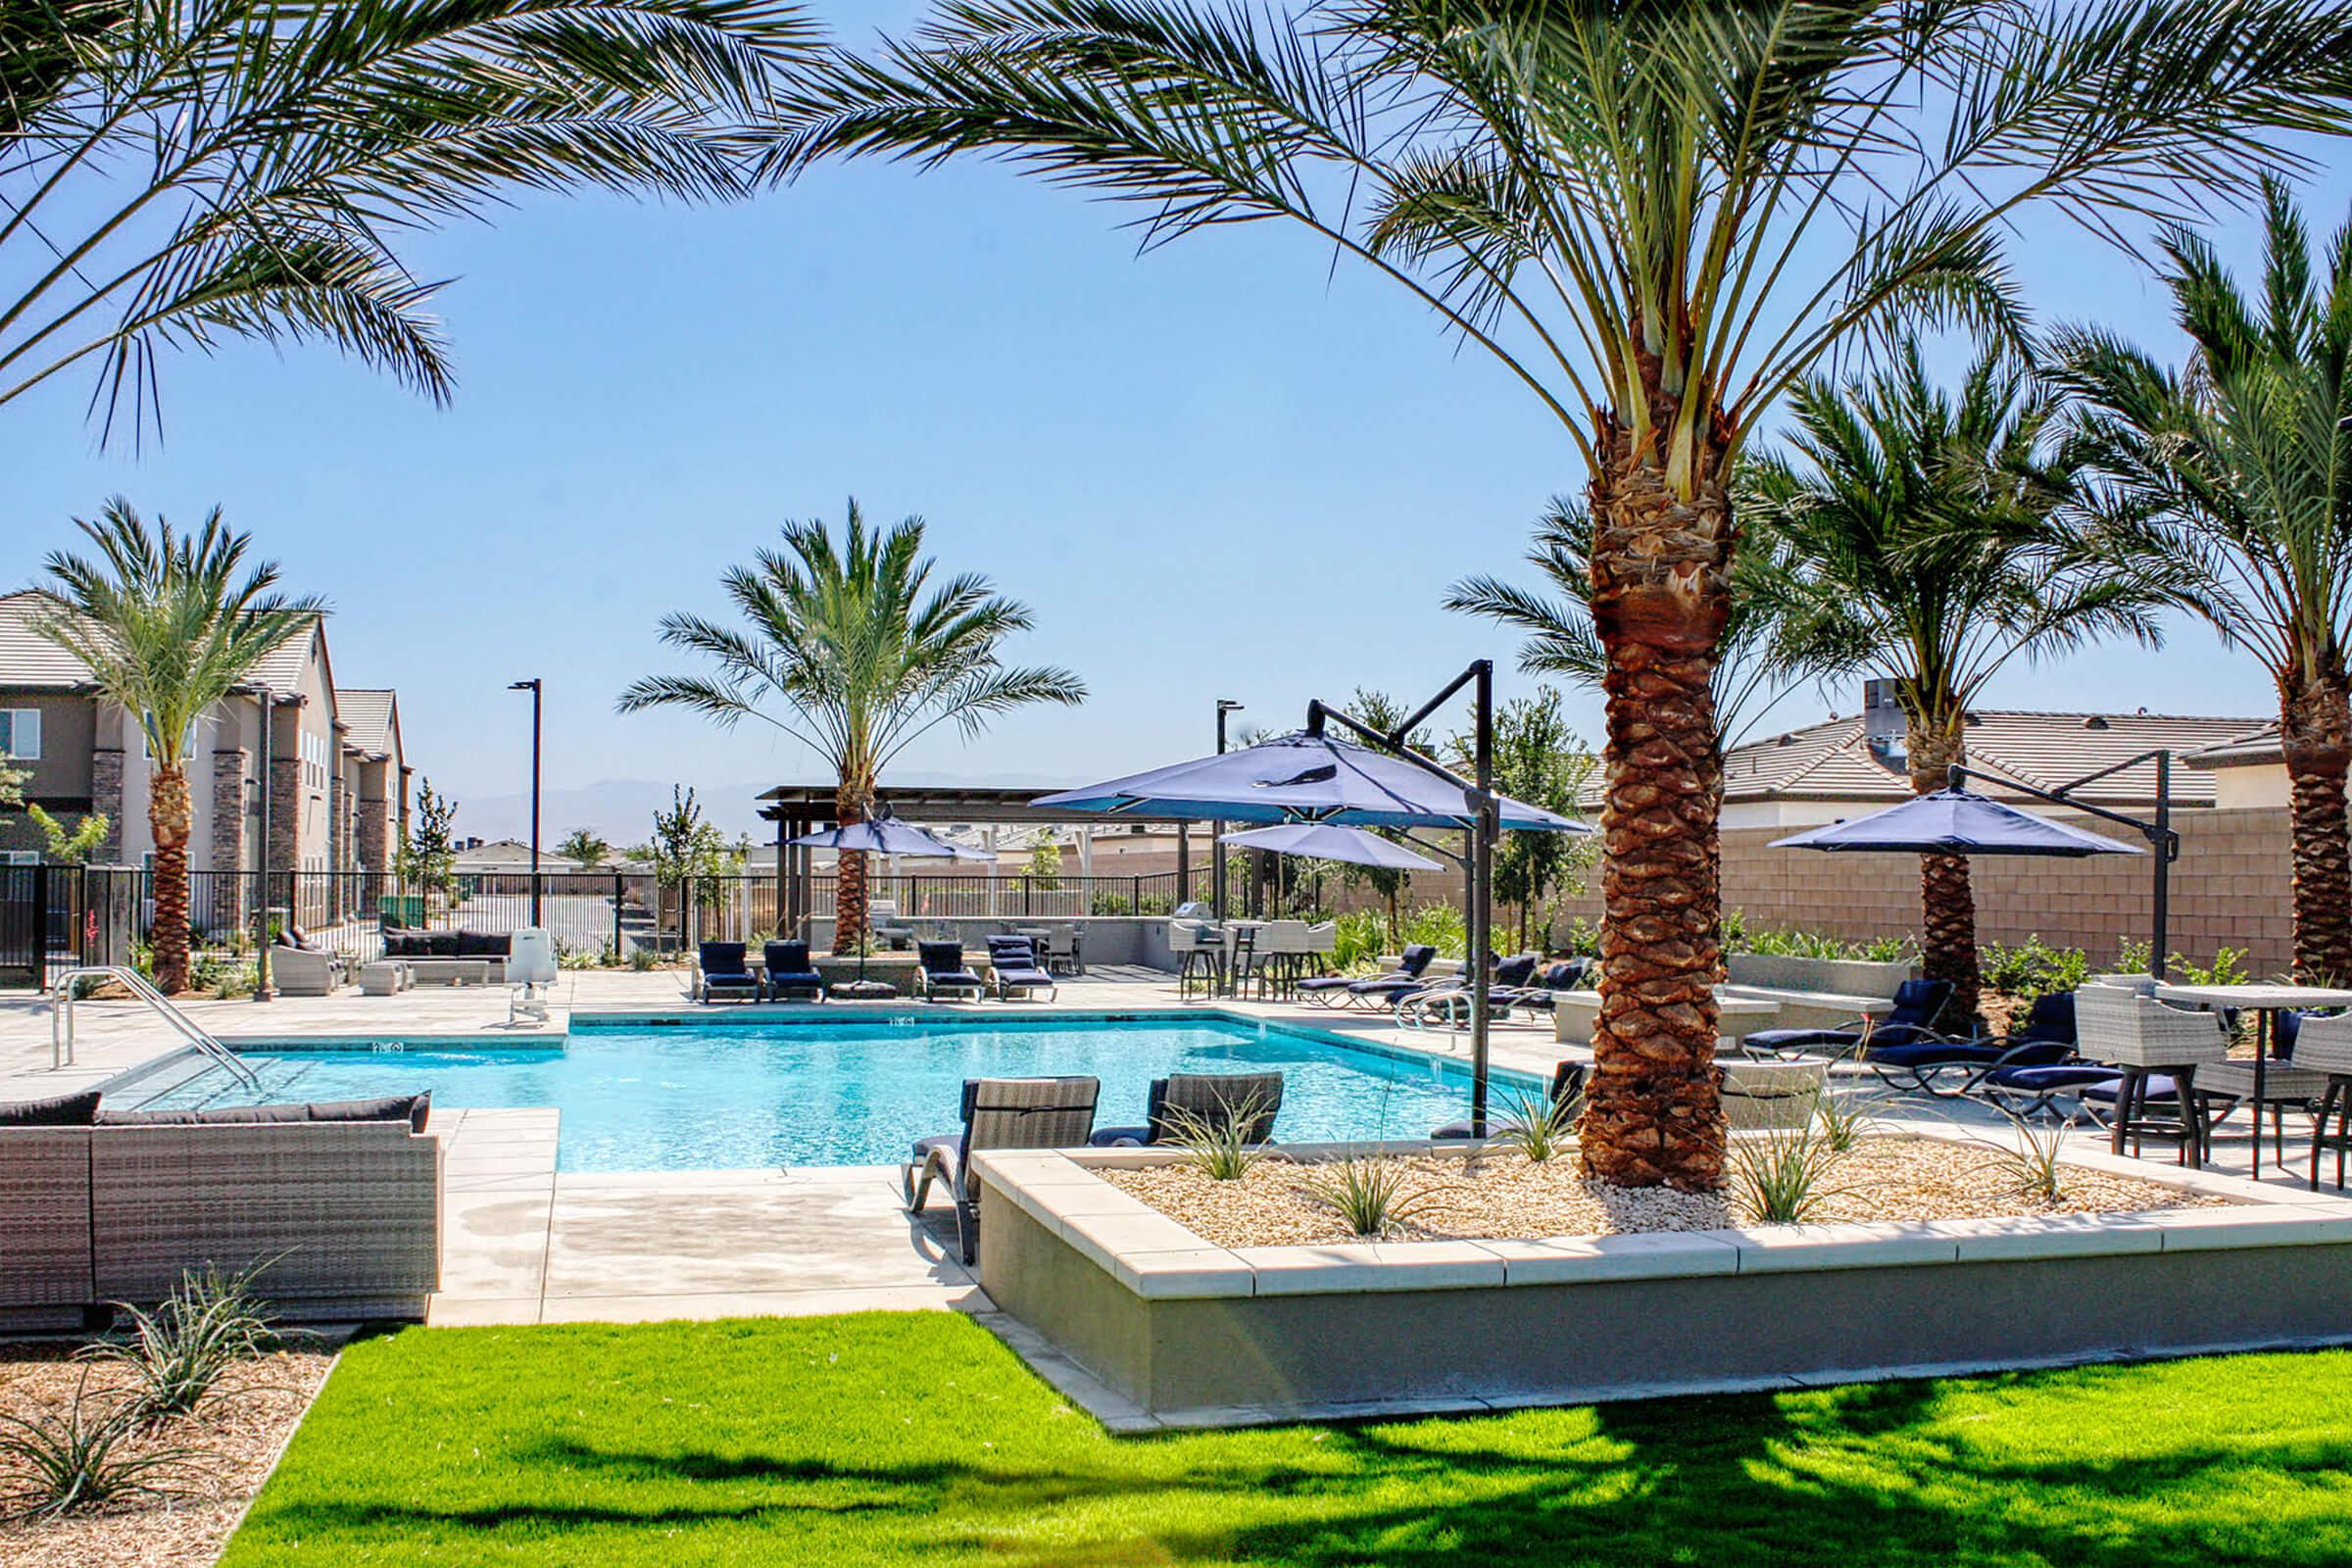 RESORT-STYLE APARTMENTS IN BAKERSFIELD, CA